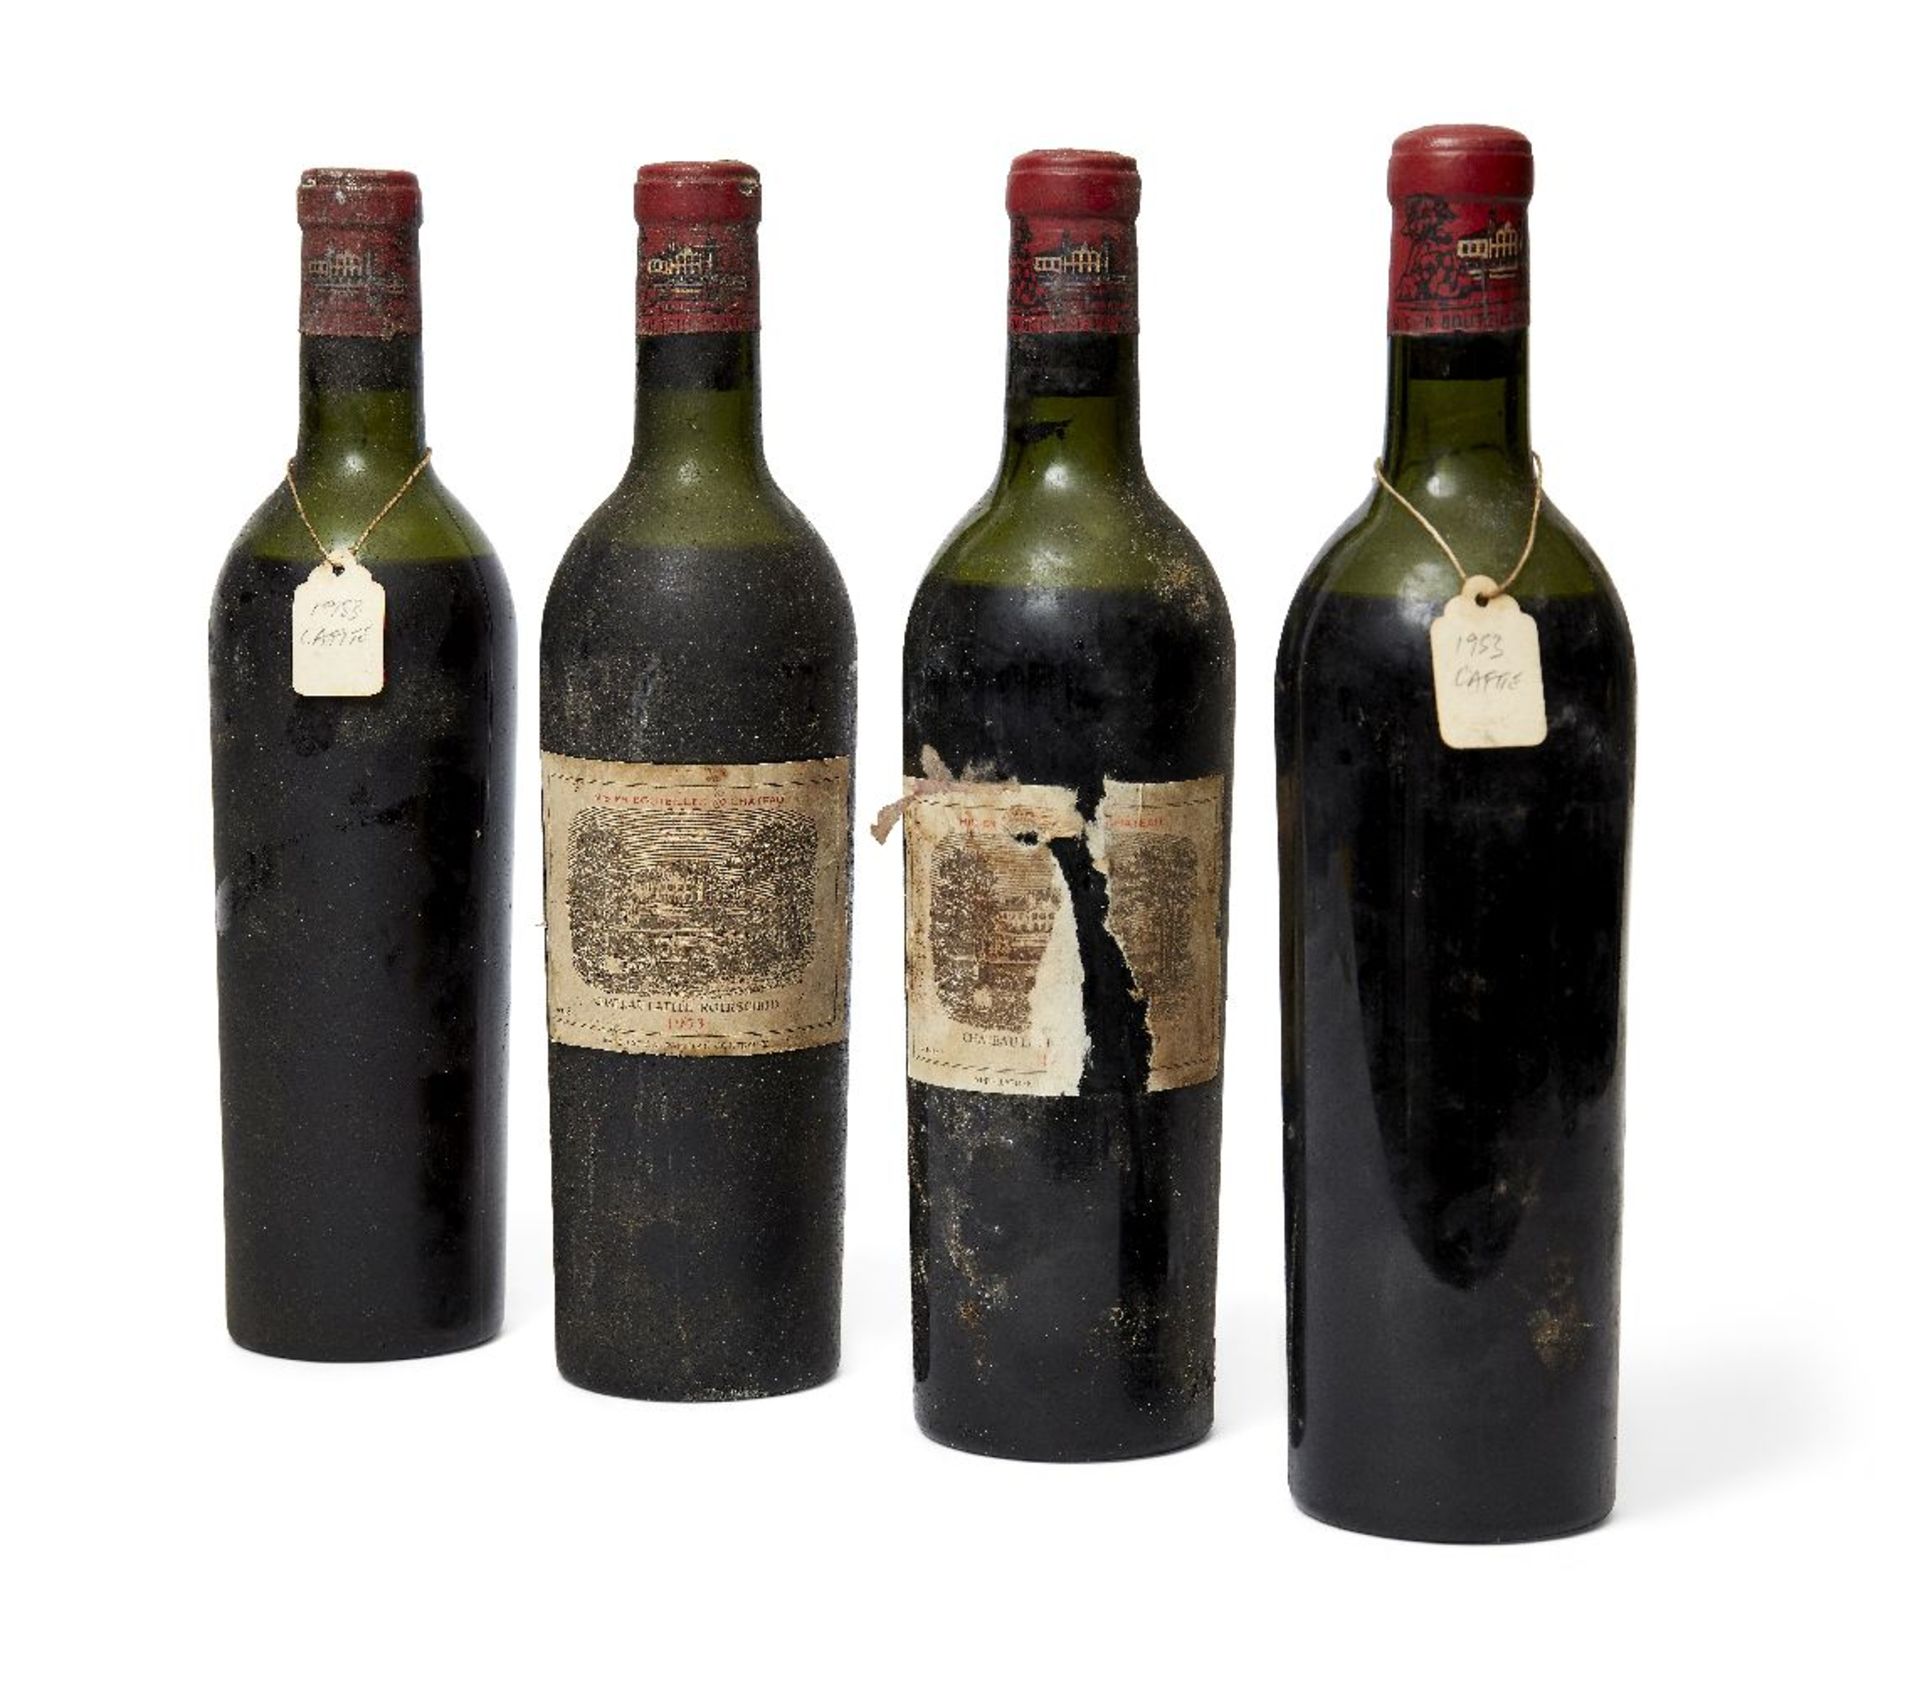 1953 Chateau Lafite-Rothschild, Pauillac, two bottles, together with a further two unlabelled